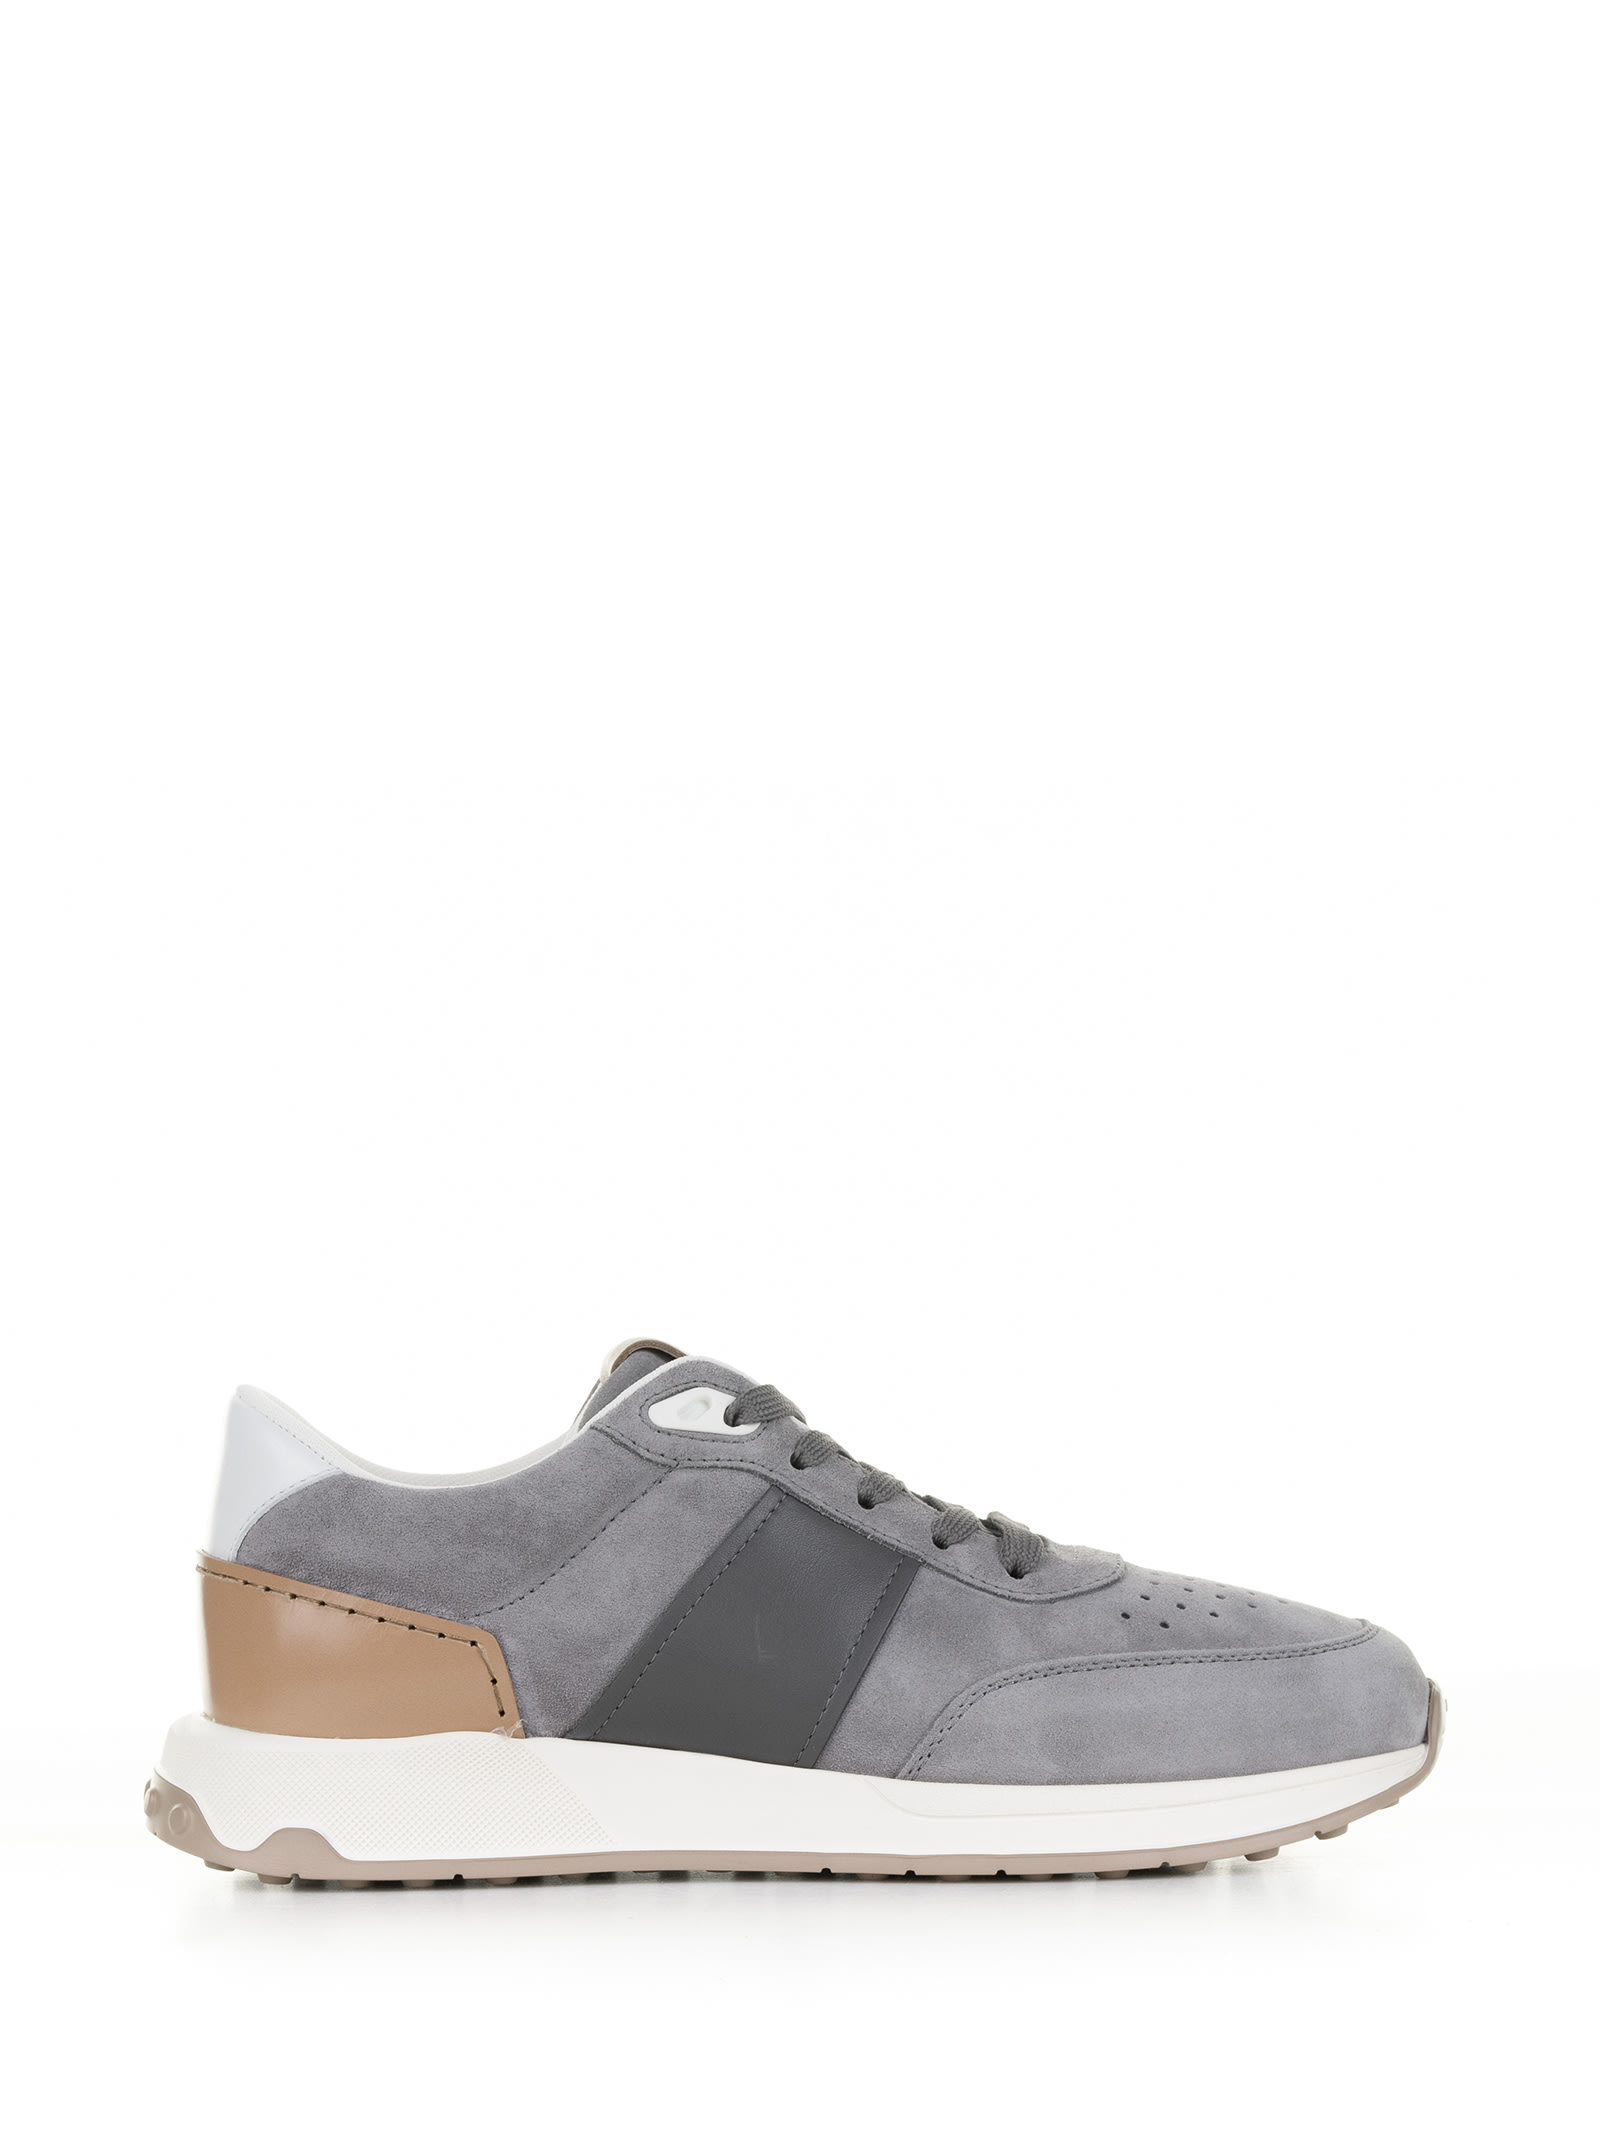 TOD'S GRAY SUEDE SNEAKER